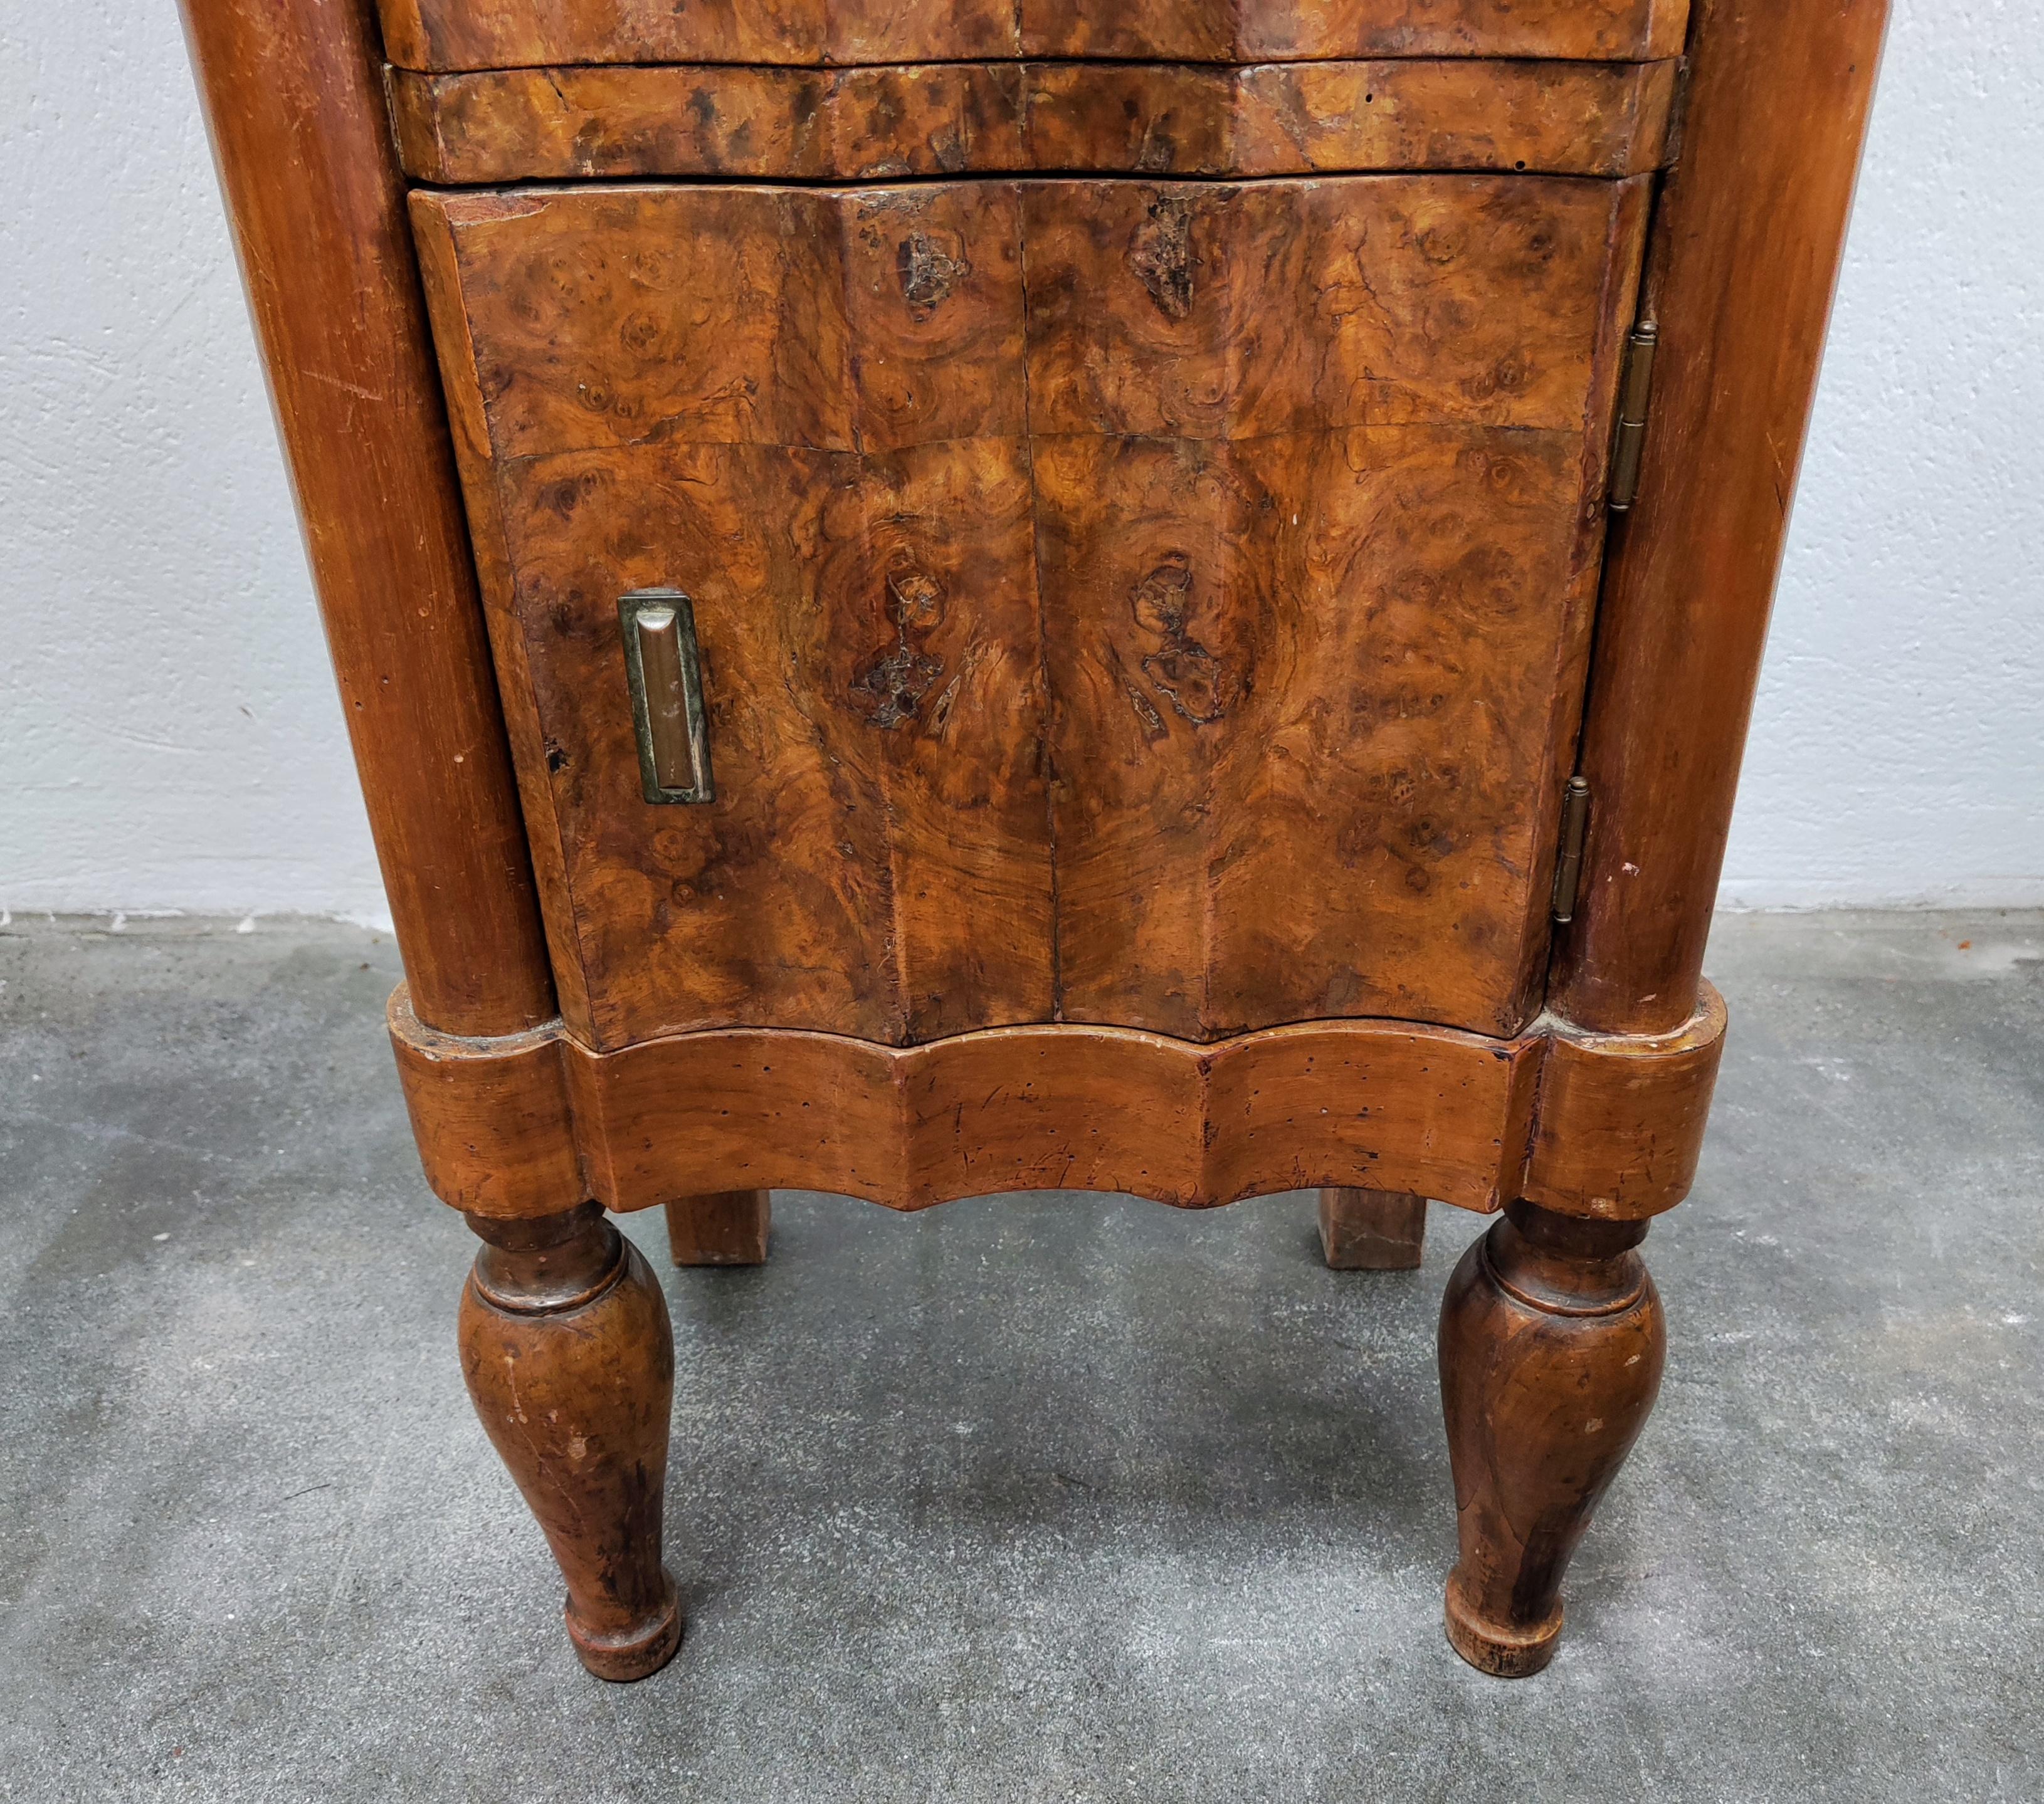 Pair of Pettite Art Deco Nightstands in Walnut Burl and Marble, Italy, 1920s For Sale 2